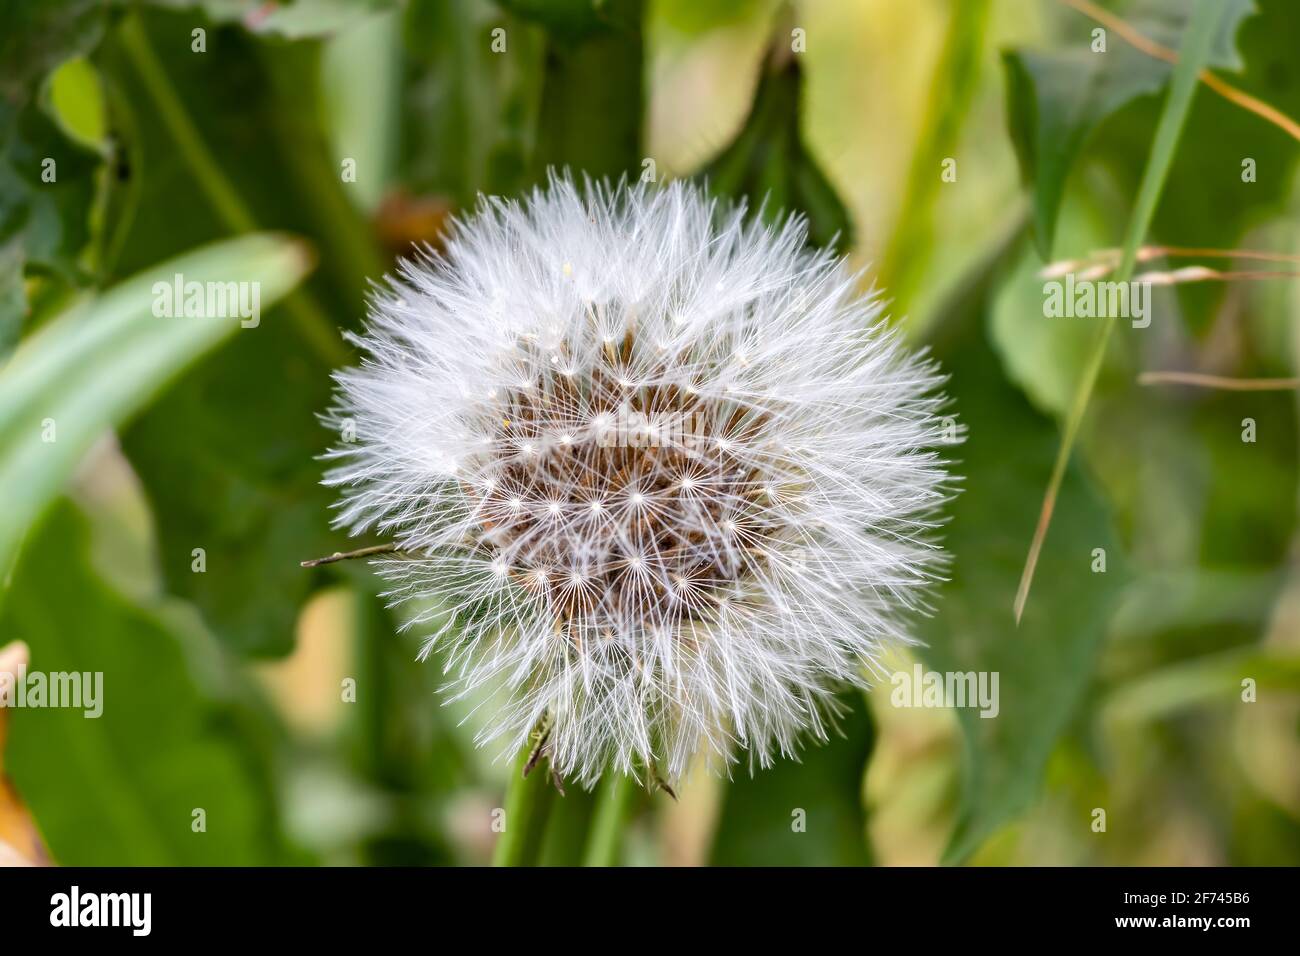 Dandelion flower, Bitter chicory or radicheta, Taraxacum officinale, whose yellow flower is known as dandelion, is a plant of the Asteraceae family Stock Photo